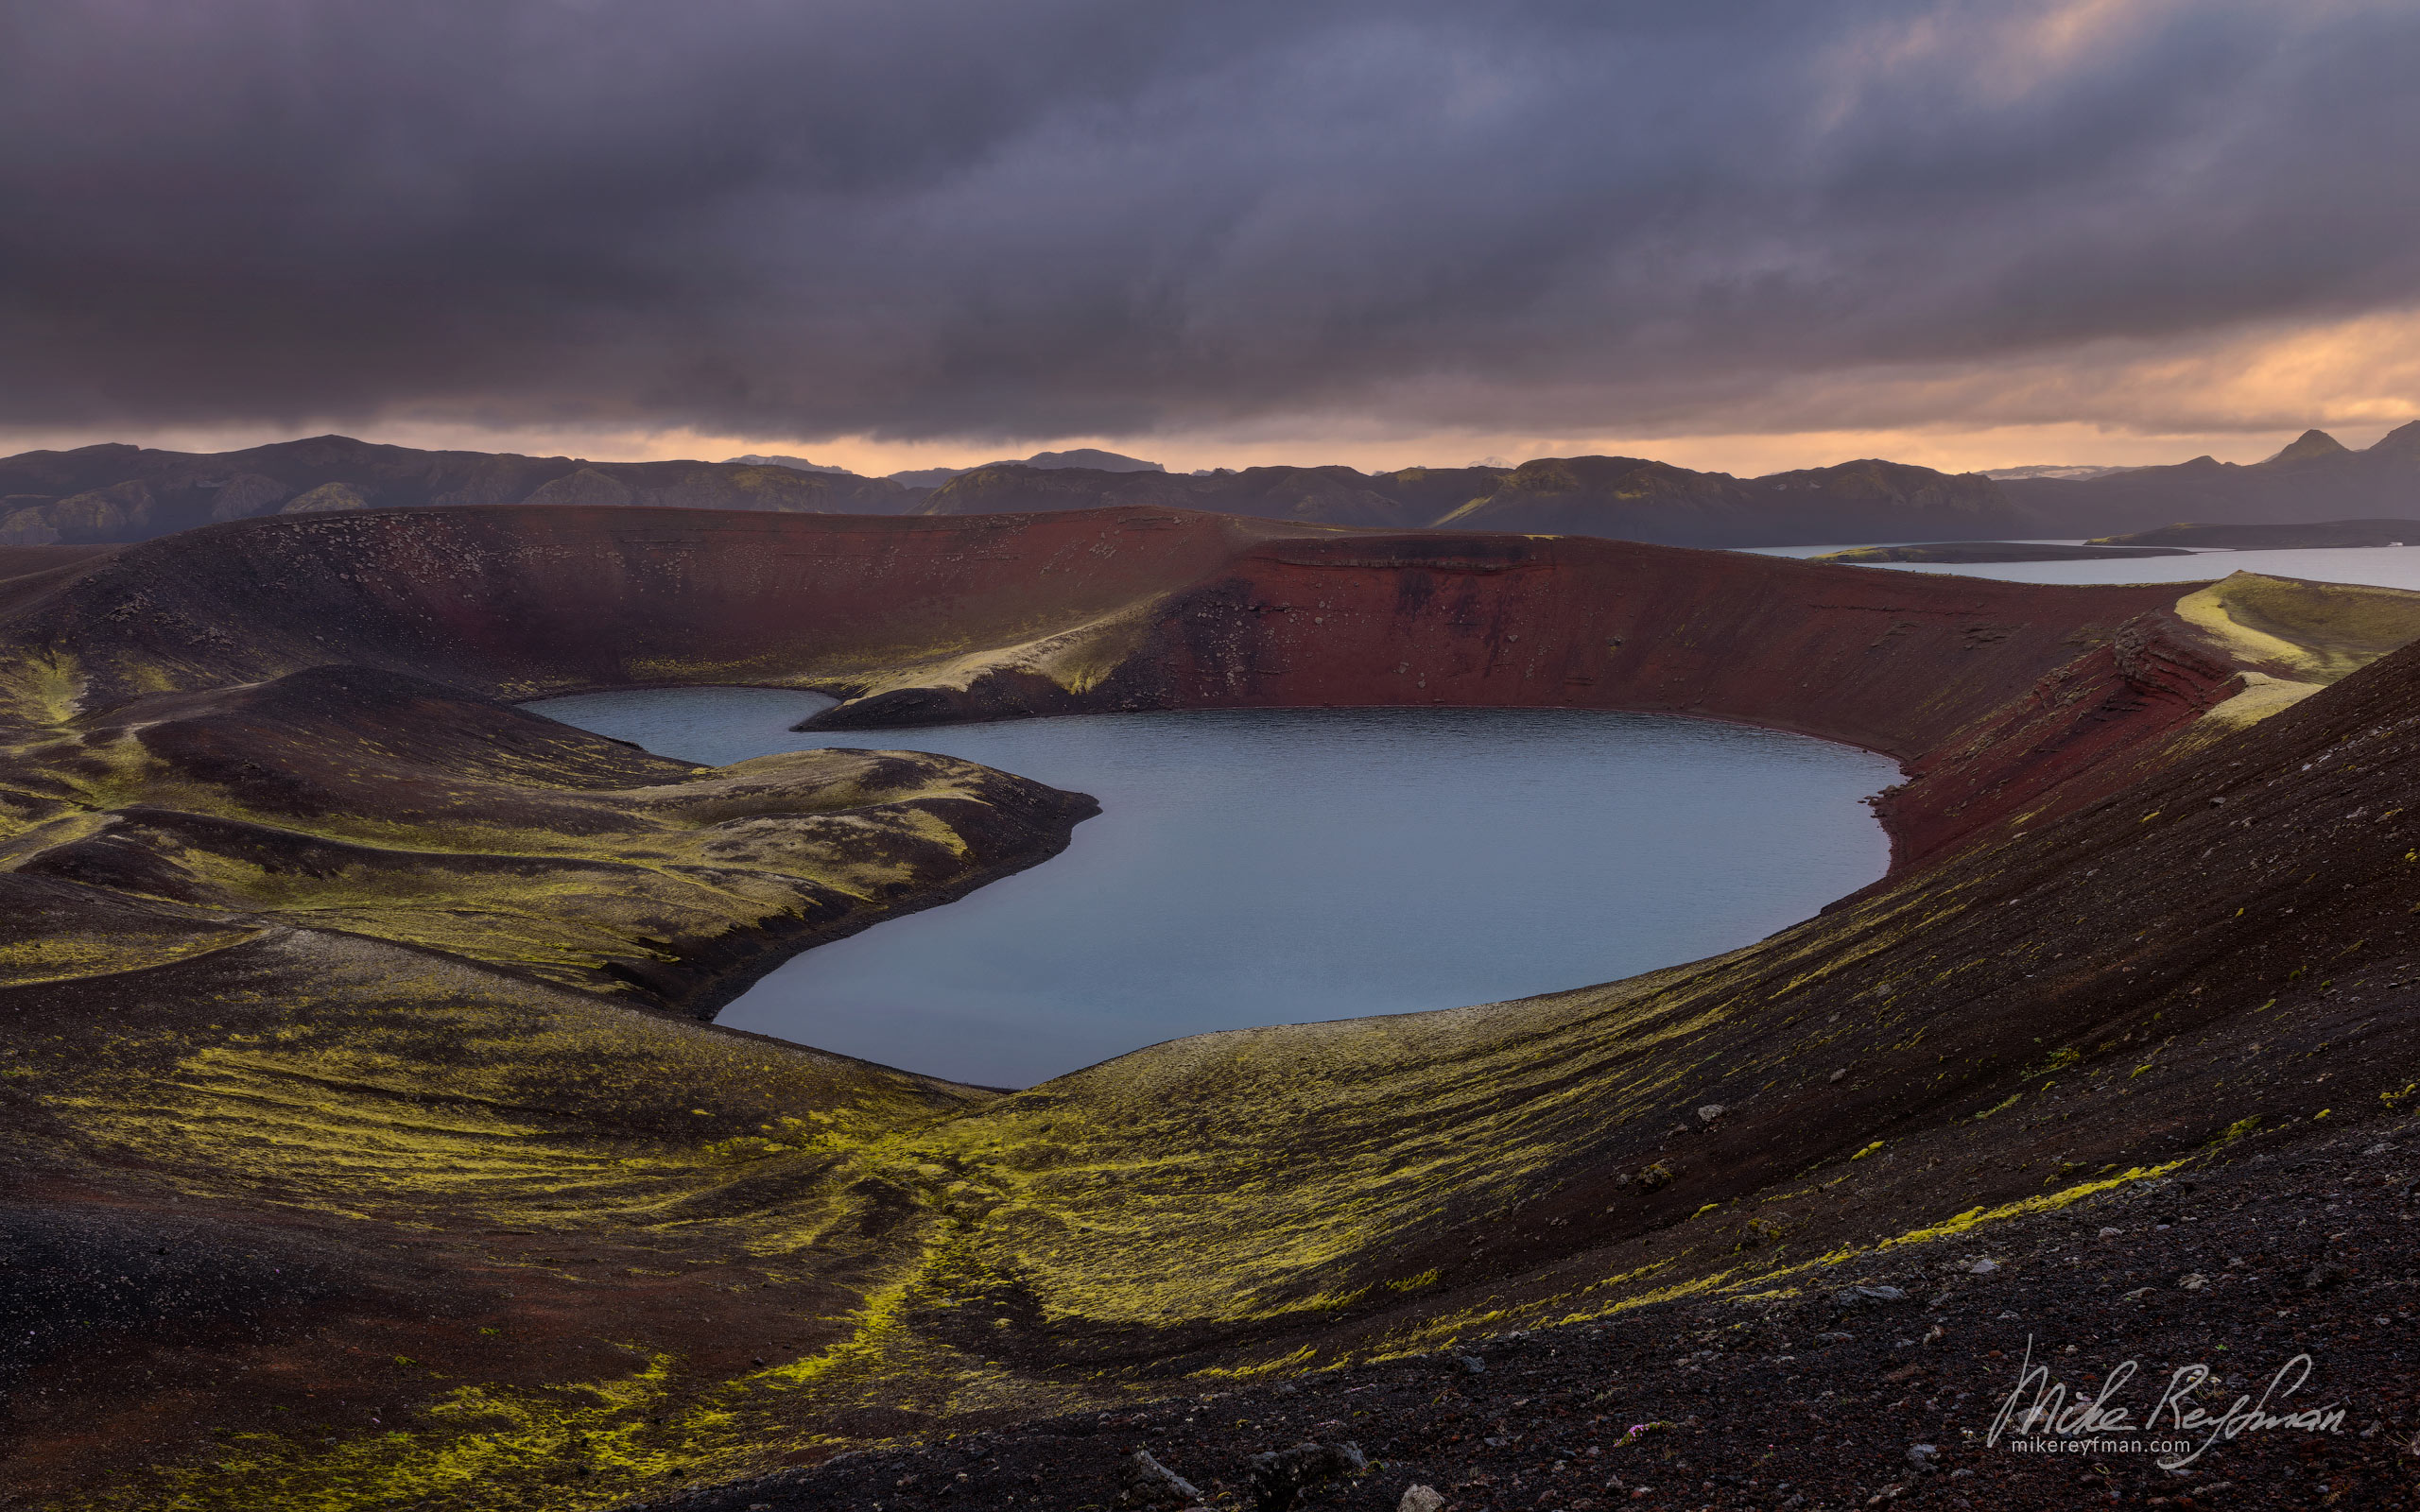 Crater lakes in the Veidivotn area. Central Highlands, Iceland. 072-IC-GP _D8B4369 - Rhyolite Mountains, Crater Lakes, Geothermal Areas, Lava Fields and Glacial Rivers. Iceland.  - Mike Reyfman Photography